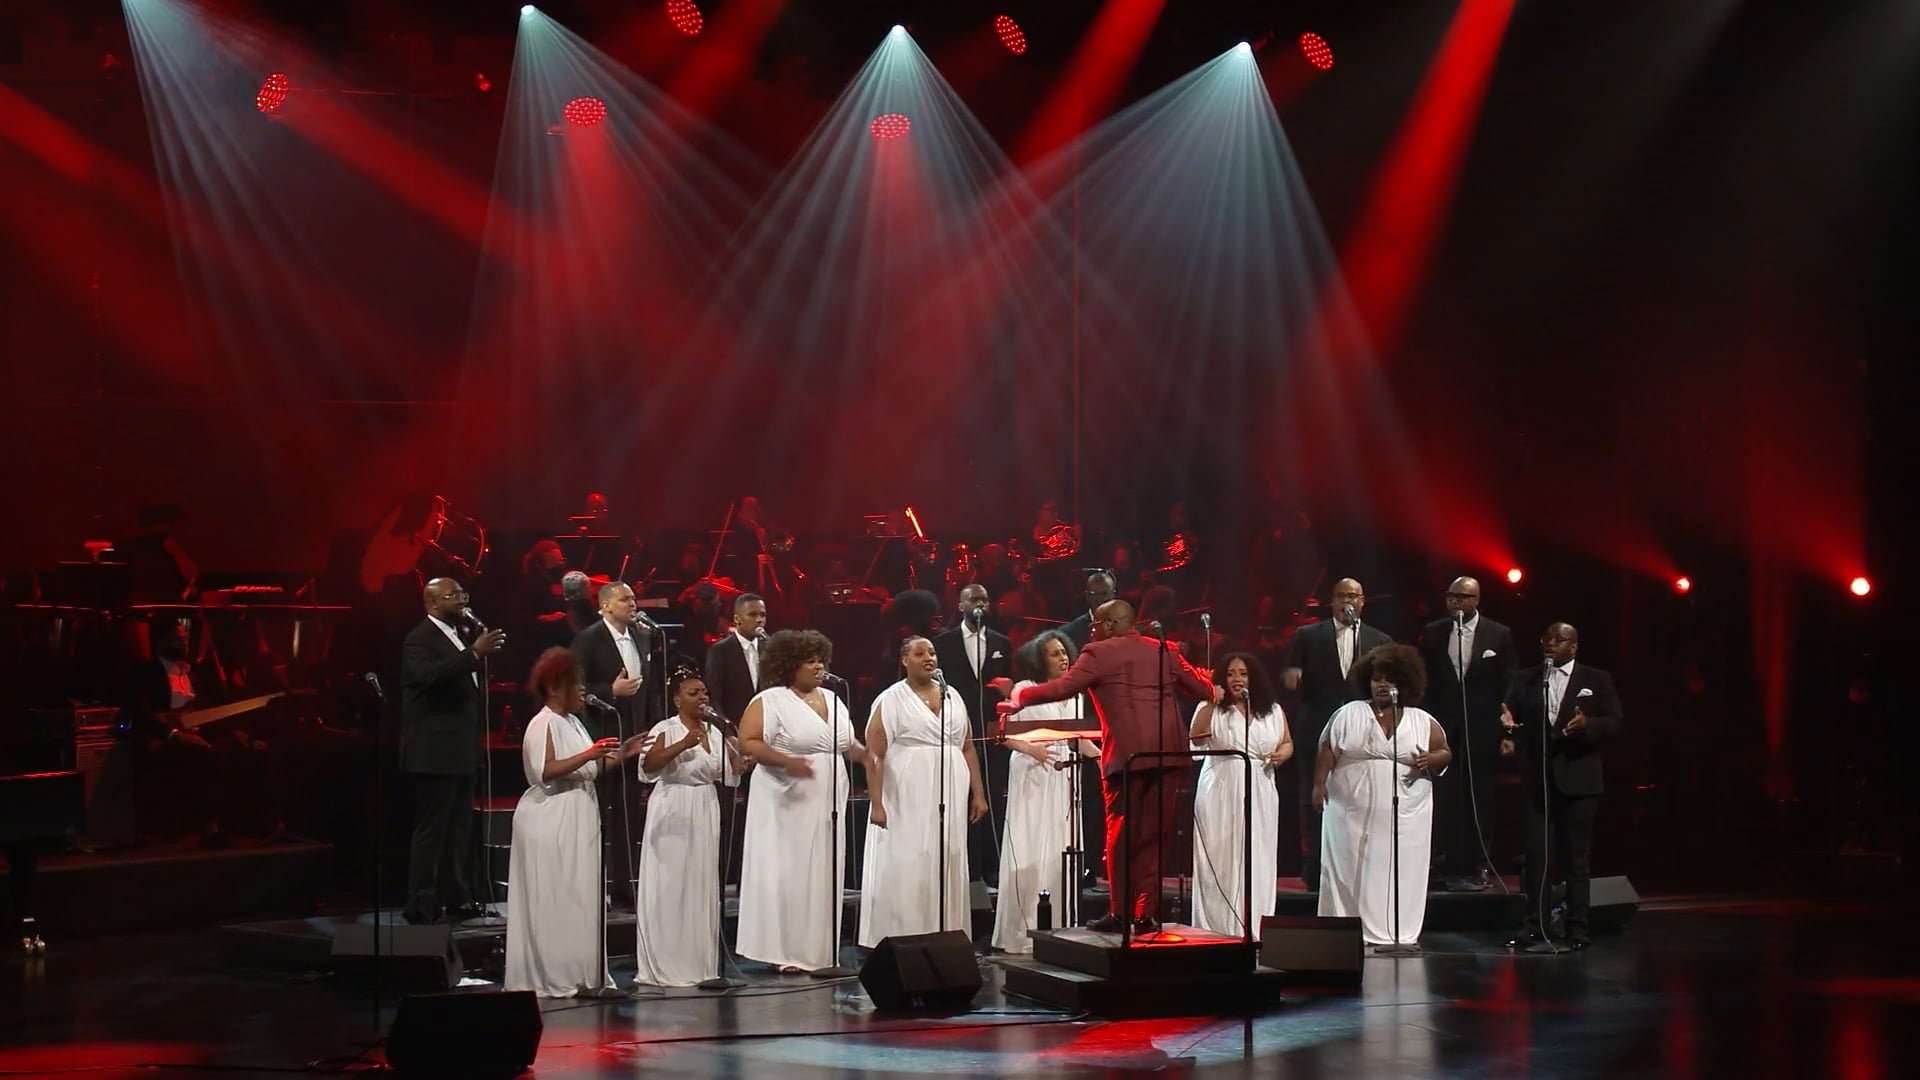 Adrian Dunn Singers perform for Live at the Harris Theater: Adrian Dunn's EMANCIPATION.